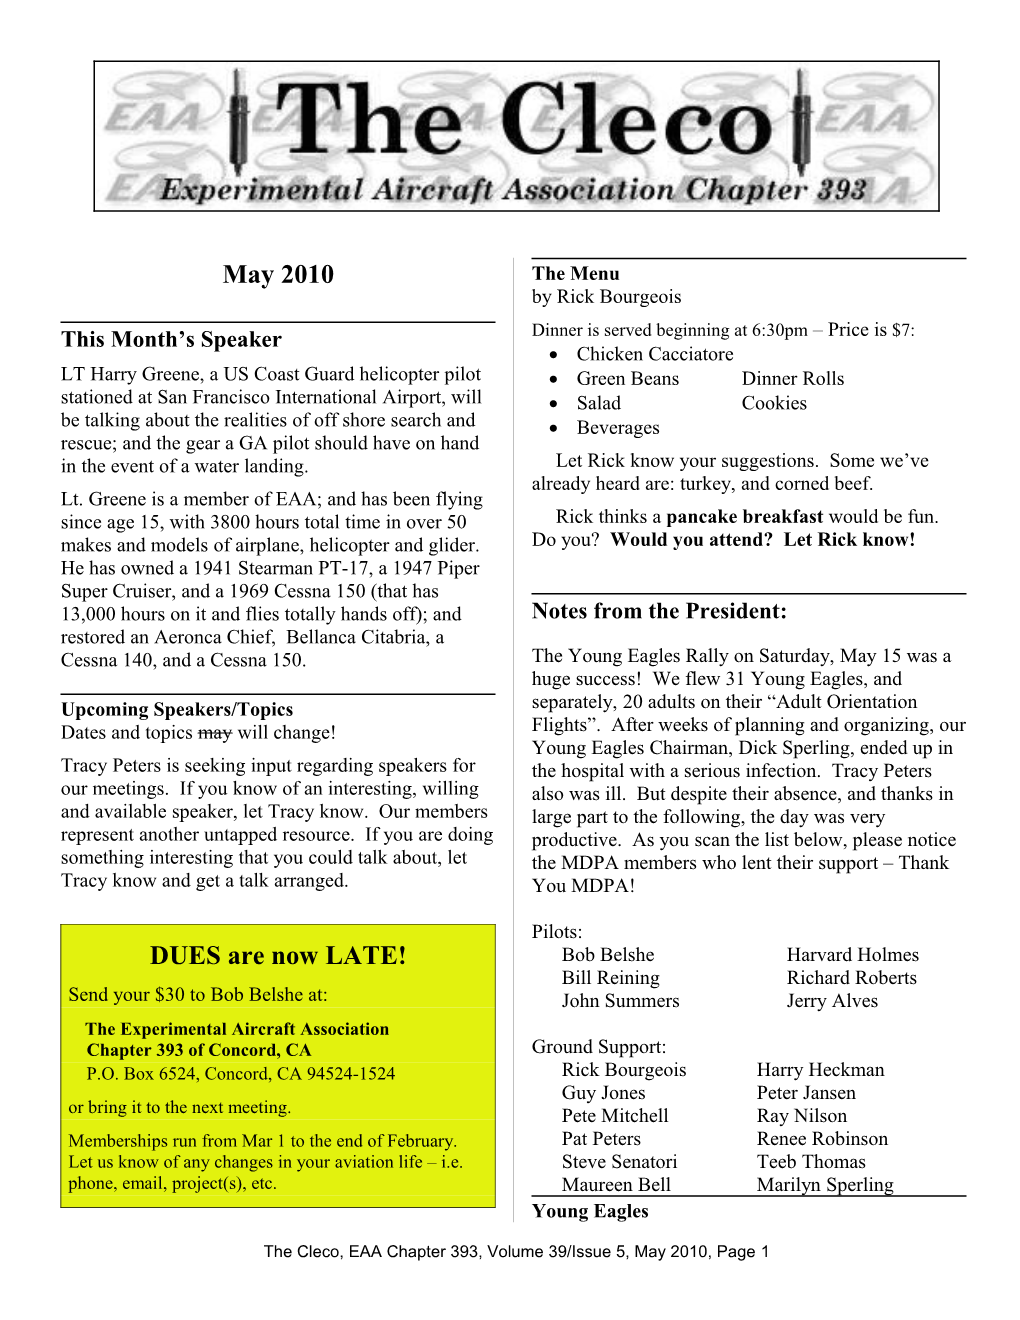 The Cleco, EAA Chapter 393, Volume 39/Issue 5, May 2010, Page 1